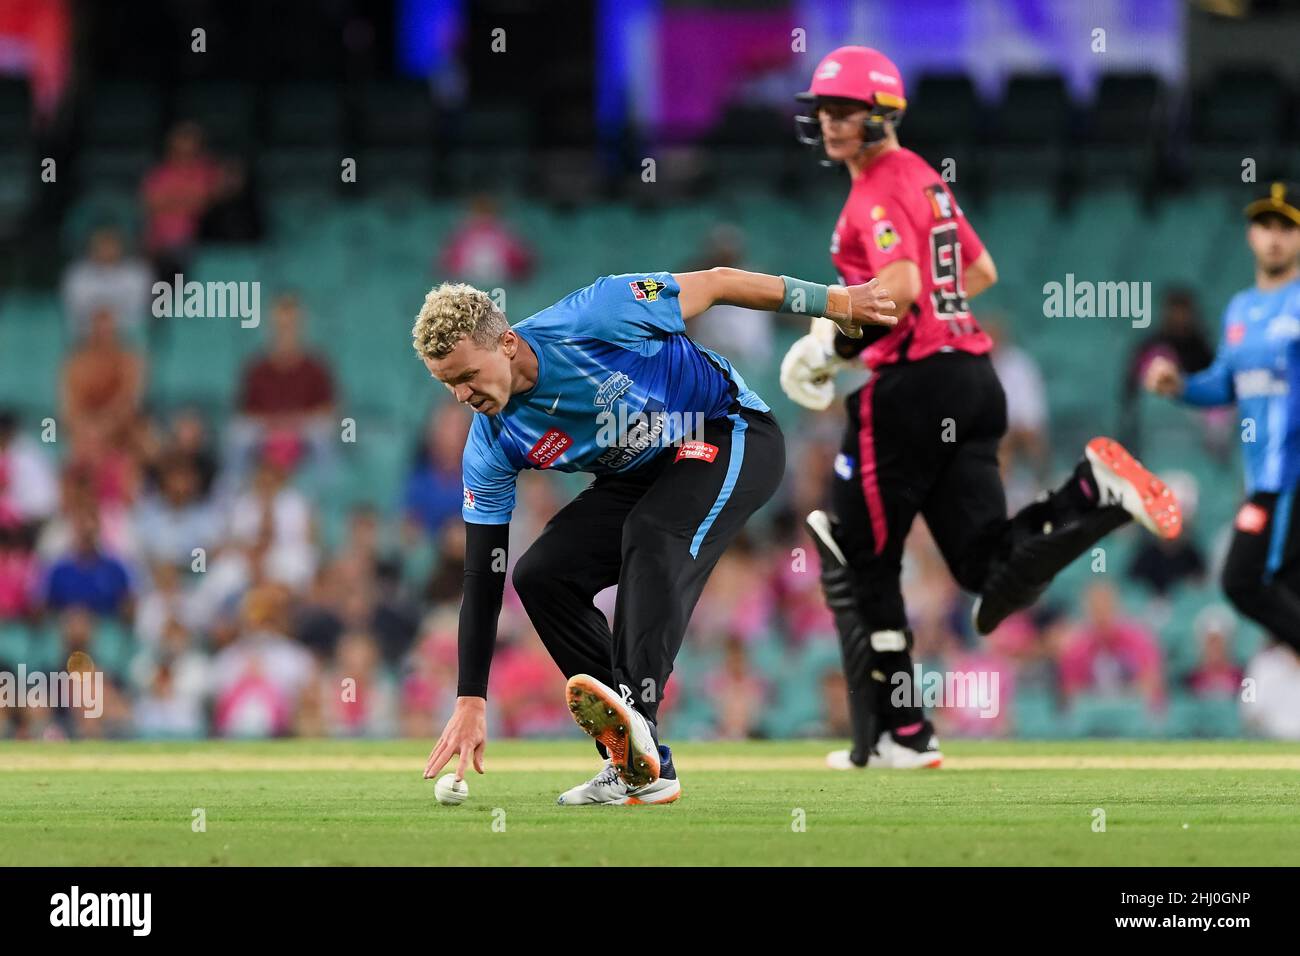 Sydney, Australia, 26 January, 2022. Peter Siddle of the Strikers fields the ball during the Big Bash League Challenger cricket match between Sydney Sixers and Adelaide Strikers at The Sydney Cricket Ground on January 26, 2022 in Sydney, Australia. Credit: Steven Markham/Speed Media/Alamy Live News Stock Photo